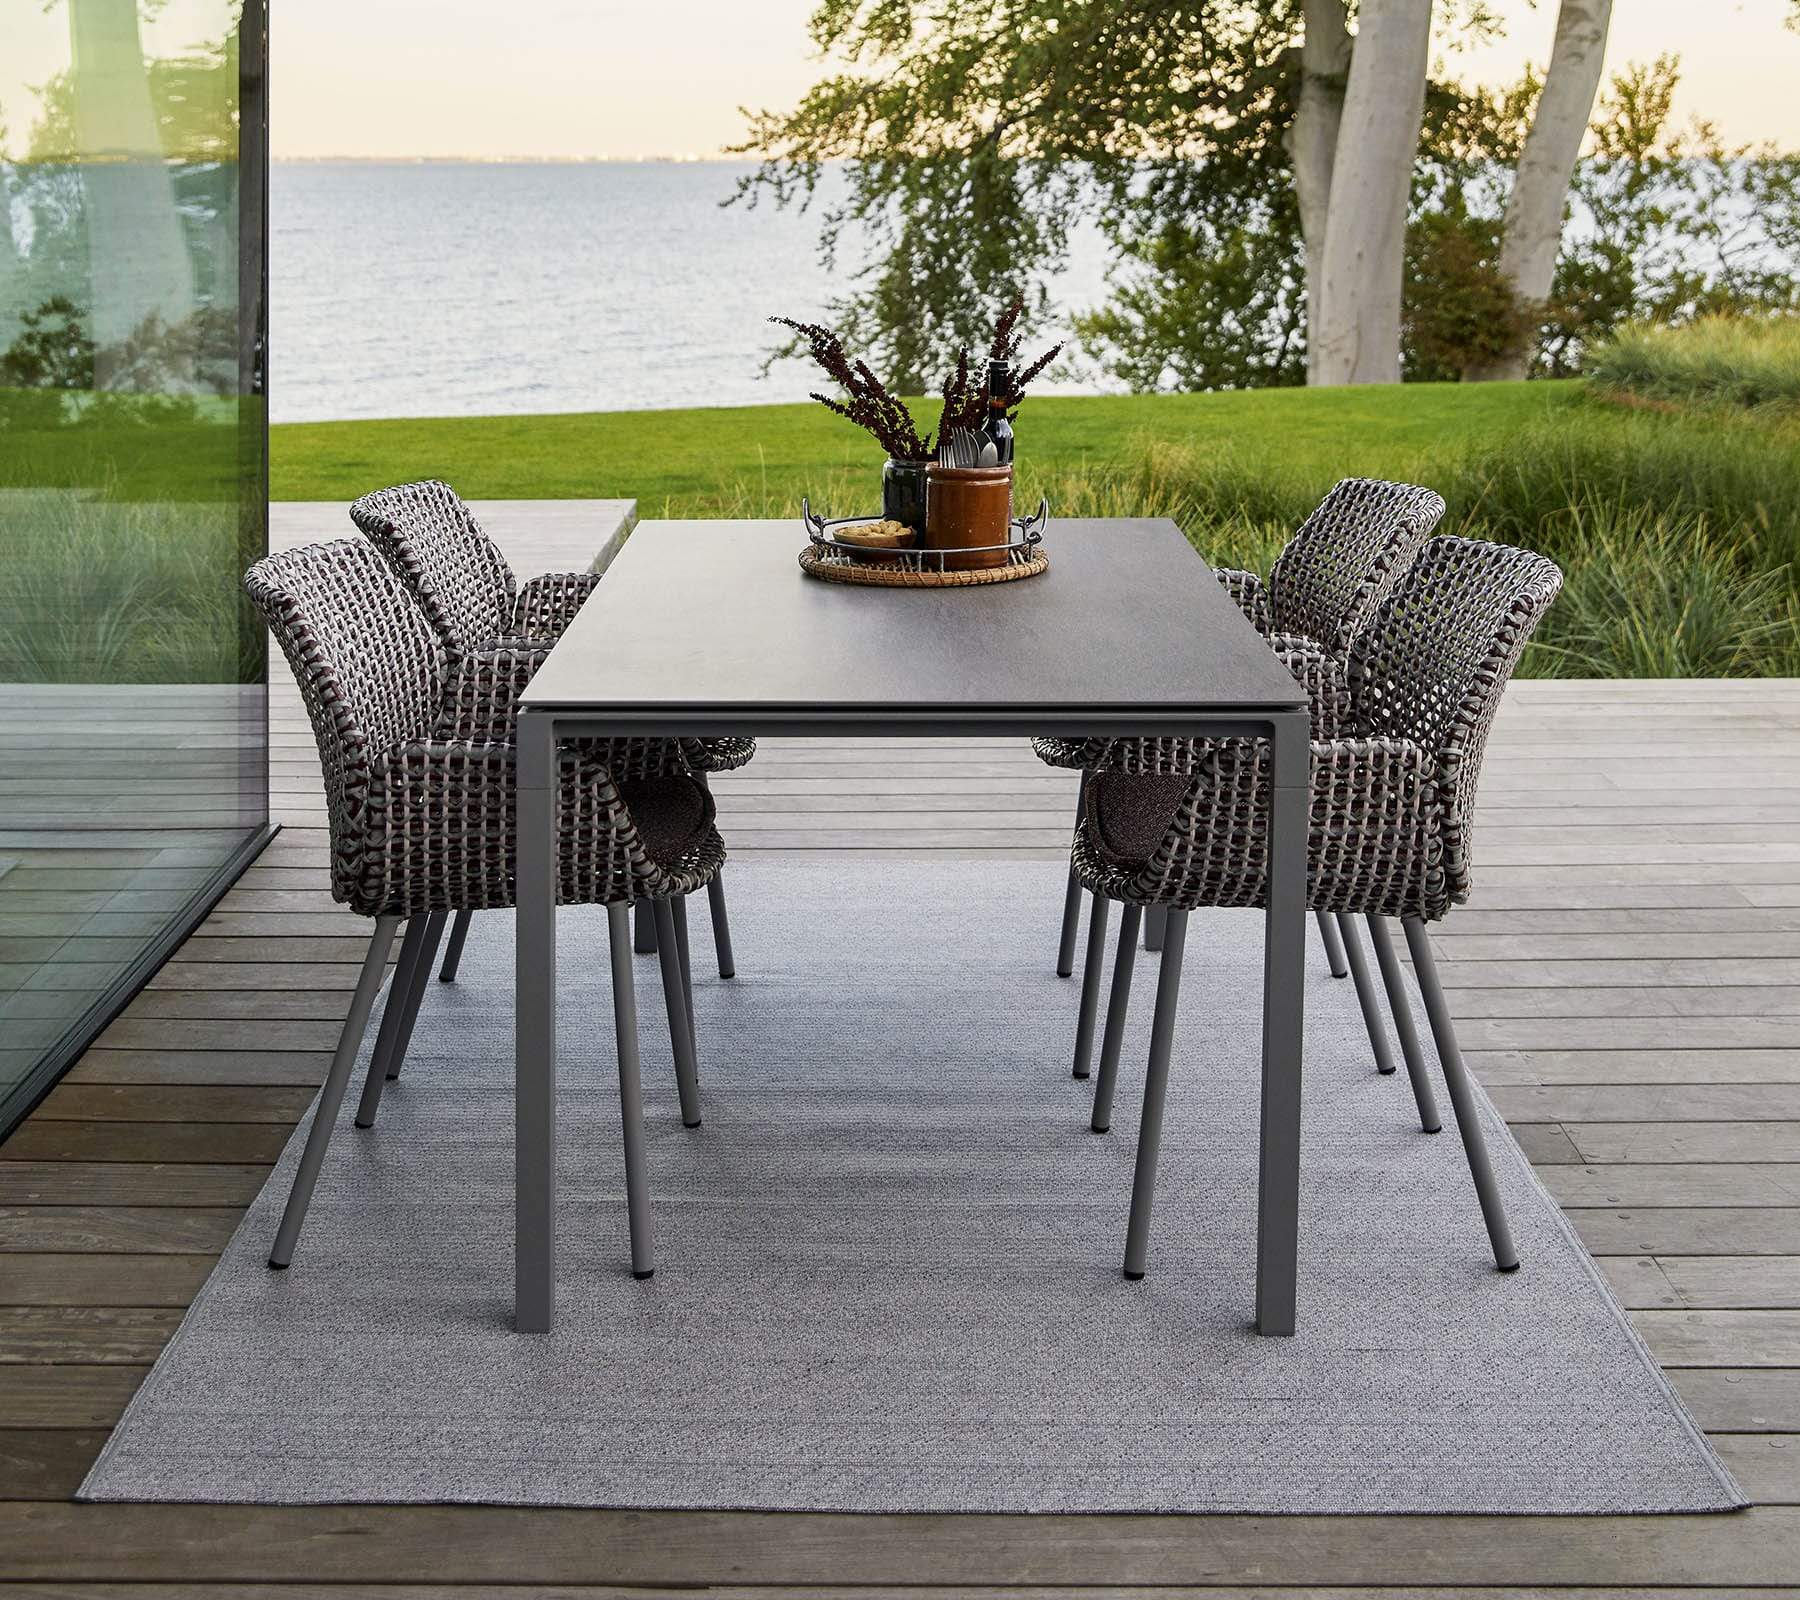 Boxhill's Vibe light grey / dusty rose outdoor armchair with grey rectangular outdoor dining table placed on wooden platform